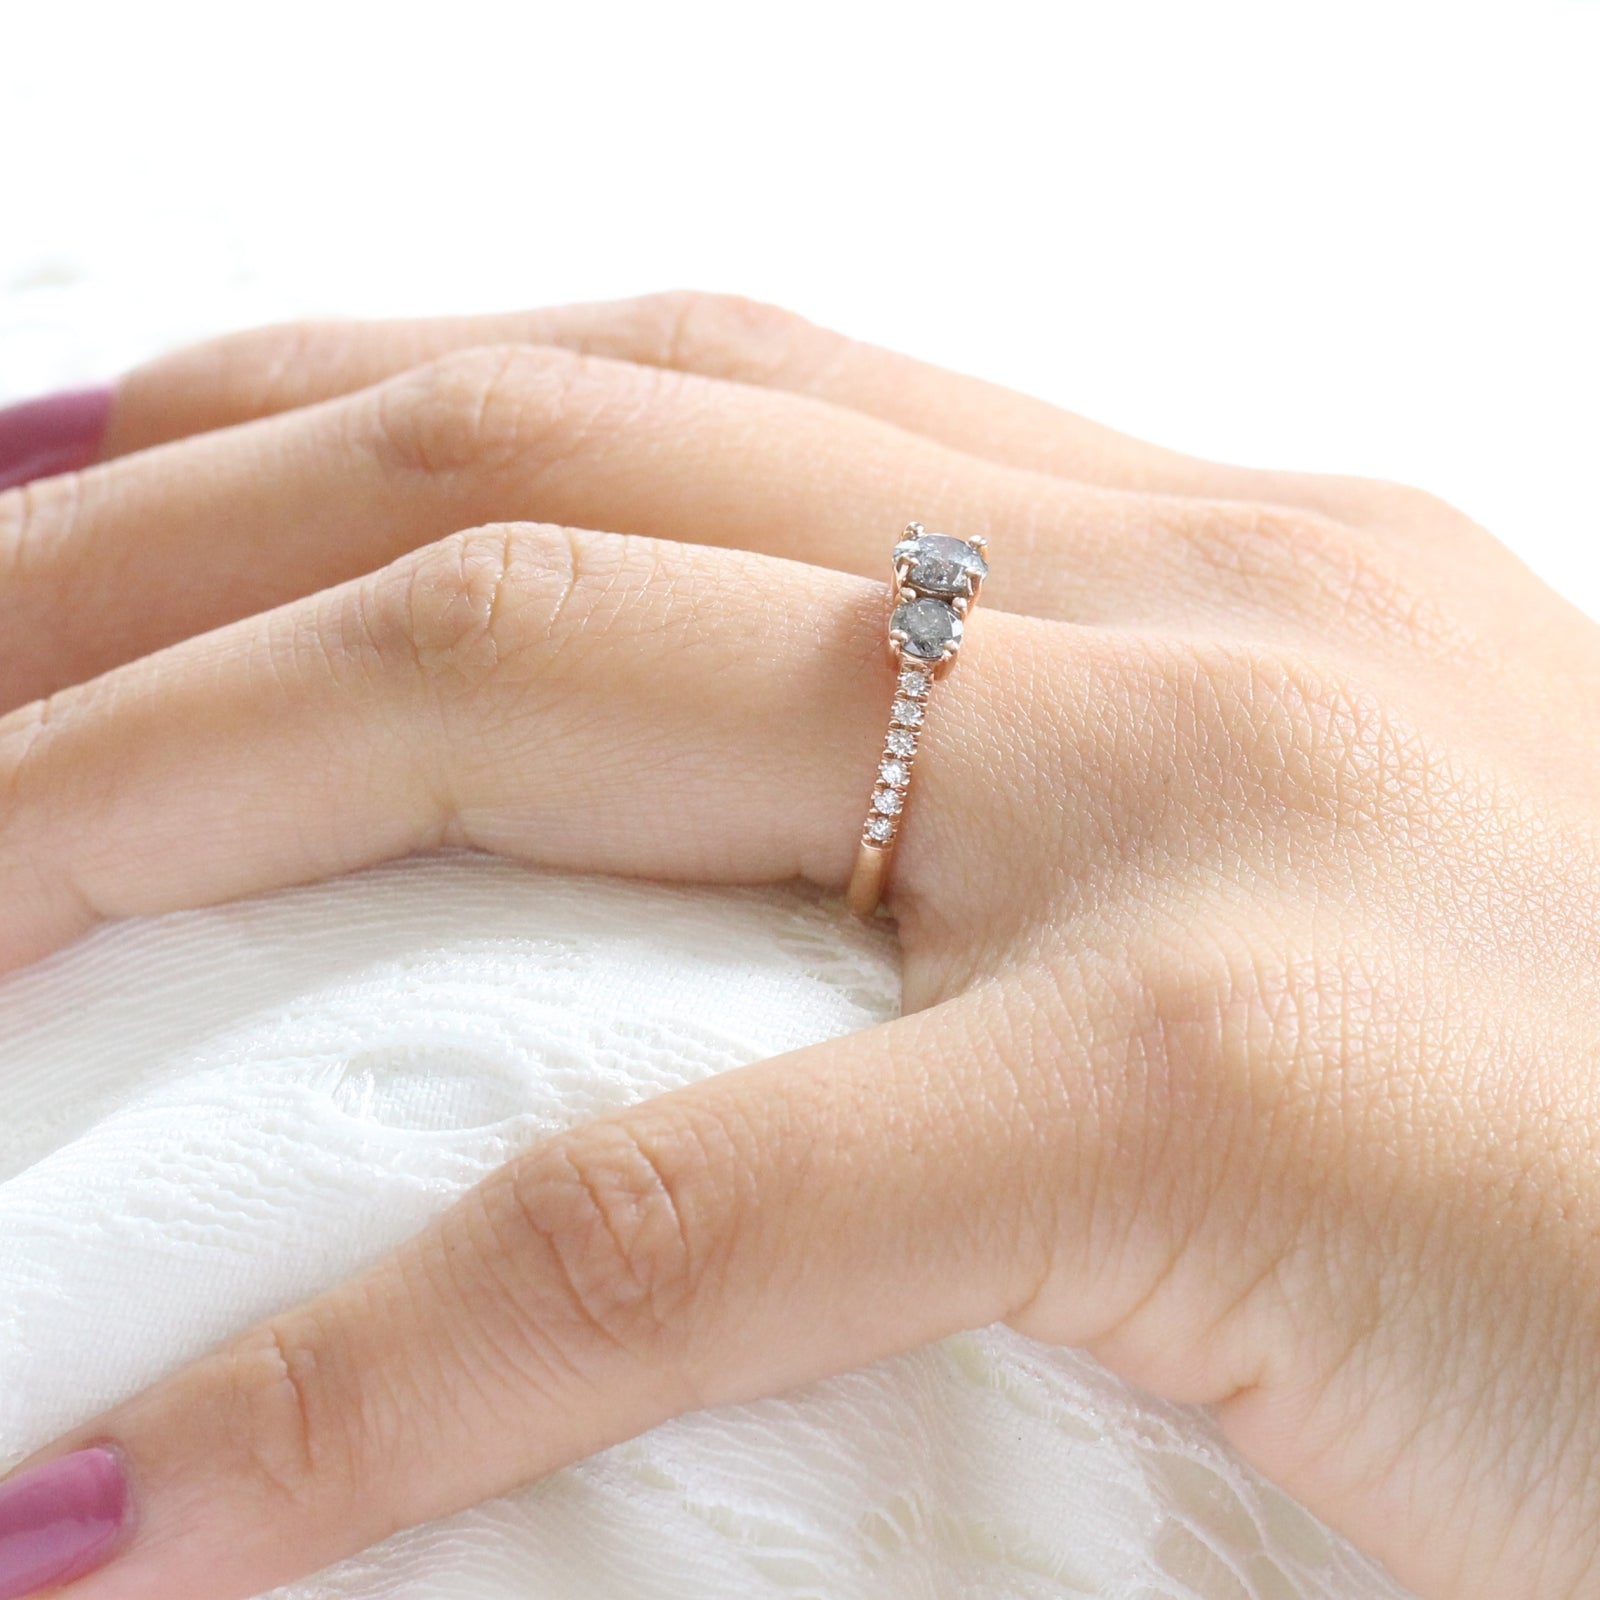 3 Stone Salt and Pepper Grey Diamond Engagement Ring in Rose Gold Pave Band by La More Design Jewelry